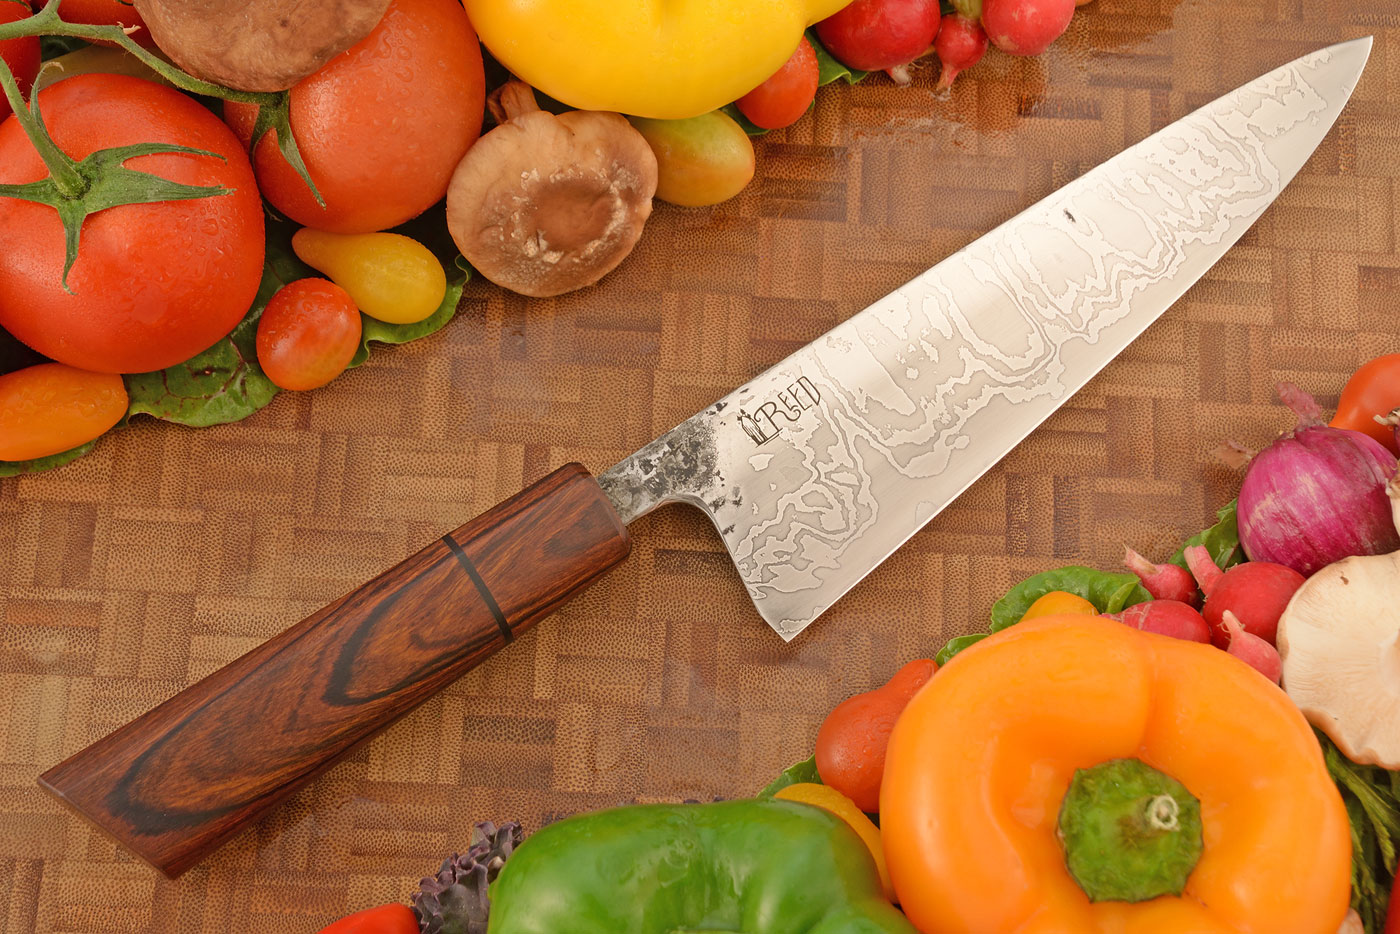 Damascus Chef's Knife (7-2/3 in.) with Desert Ironwood